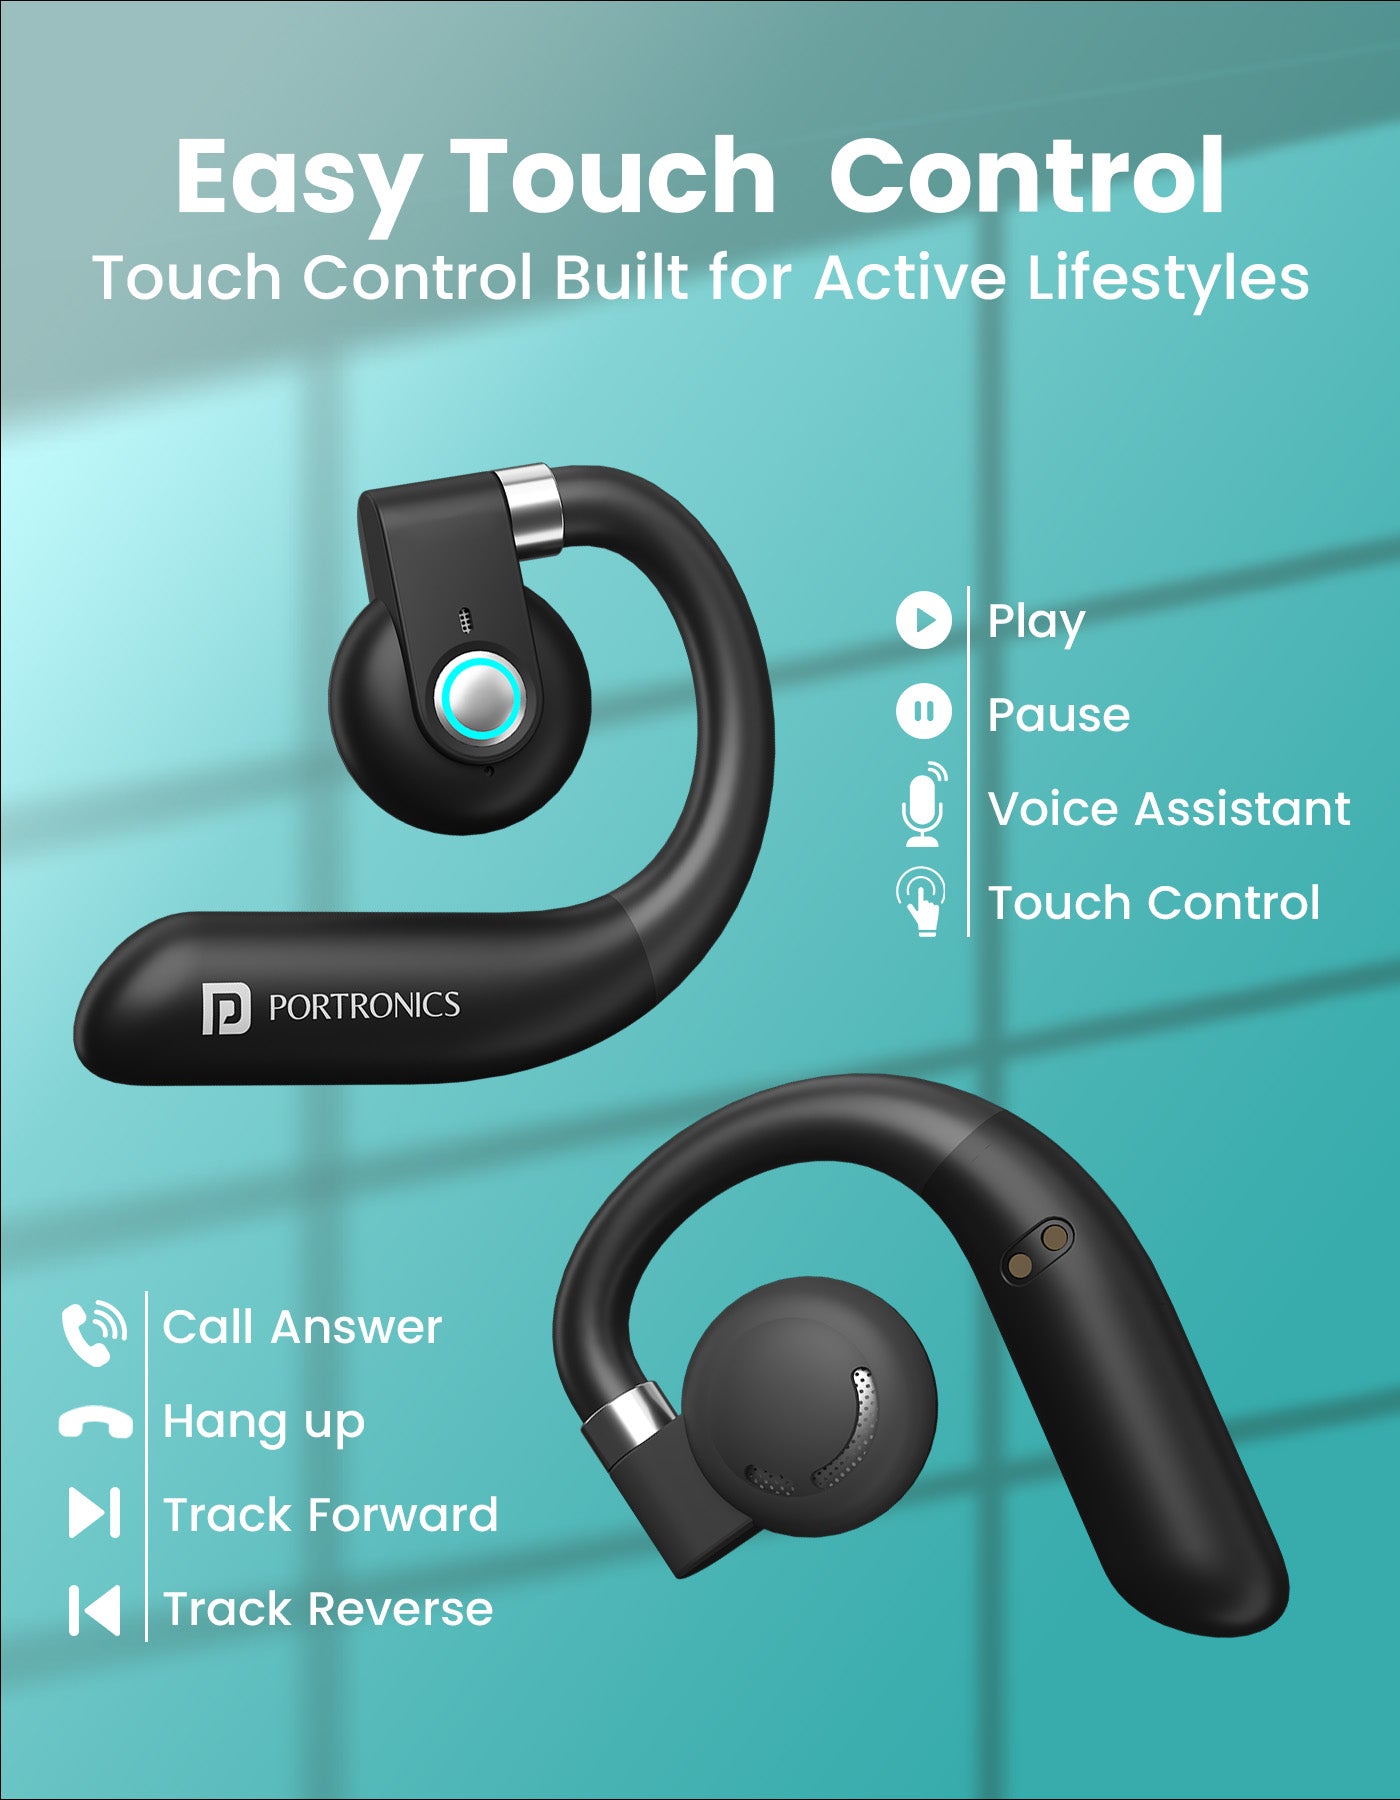 Portronics Harmonics Twins S14 wireless bluetooth earbuds has dual mode for music and gaming.